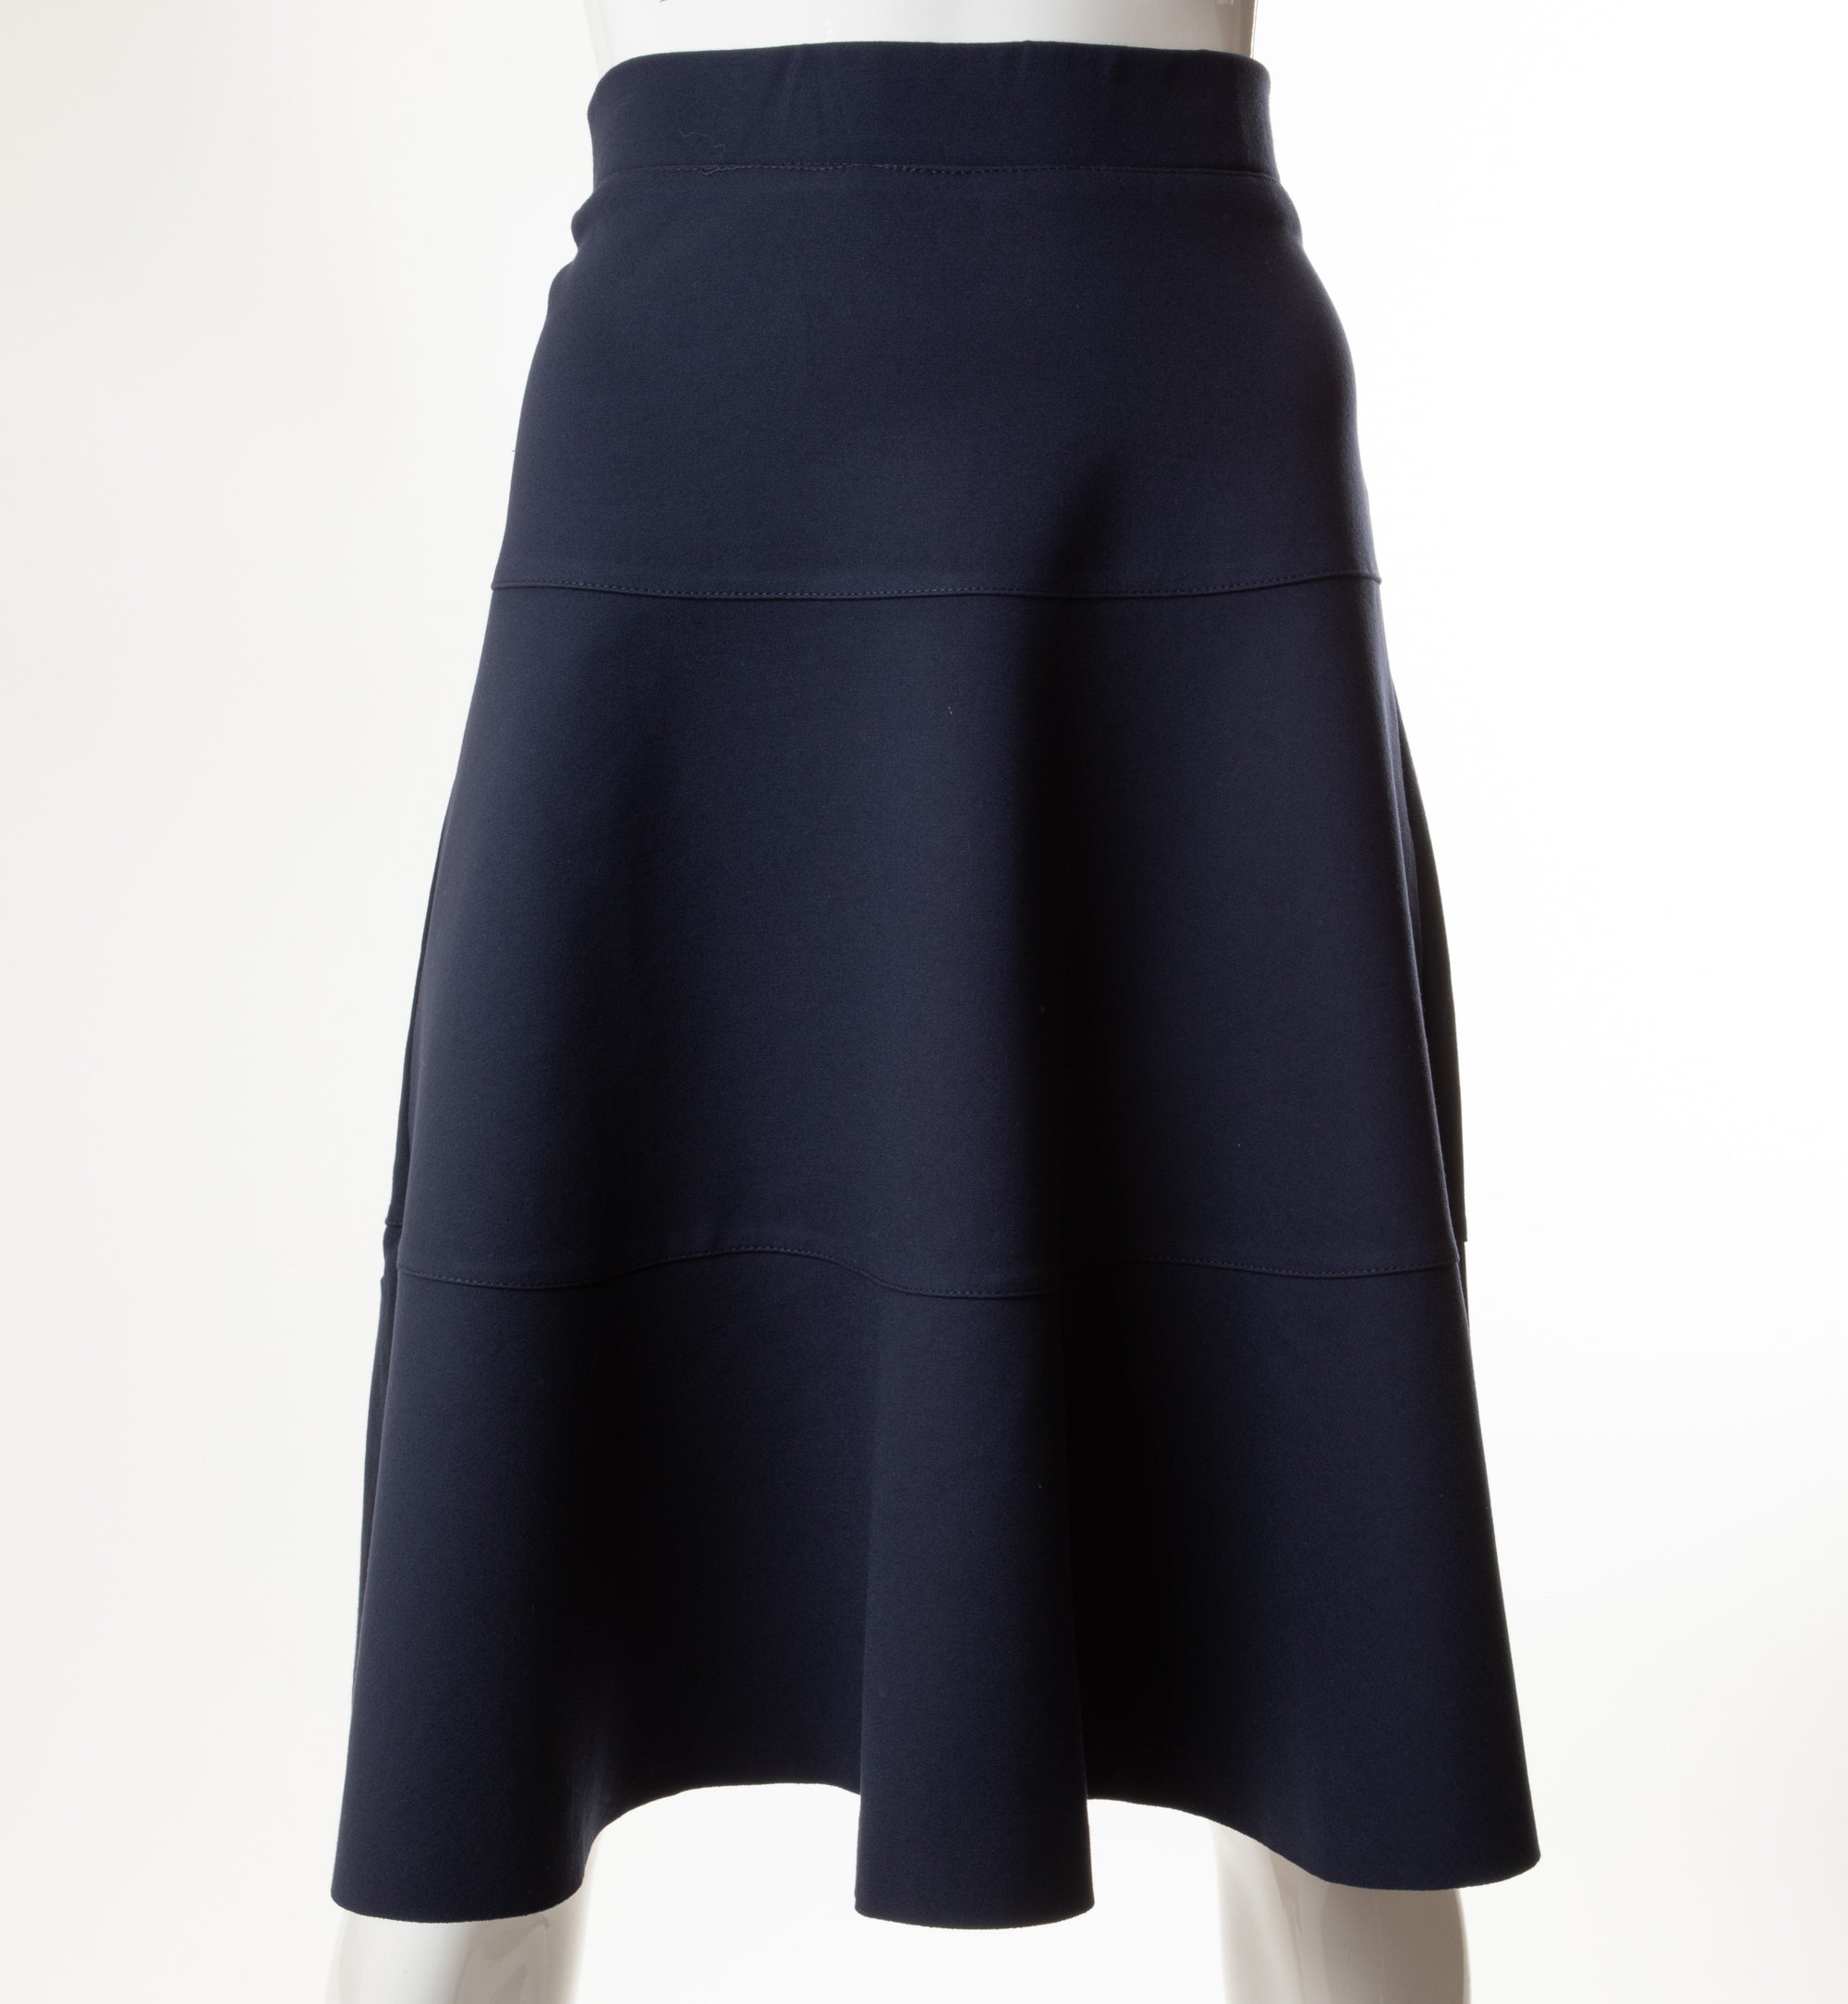 MELI 25 INCHES TIERED PONTE SKIRT NAVY